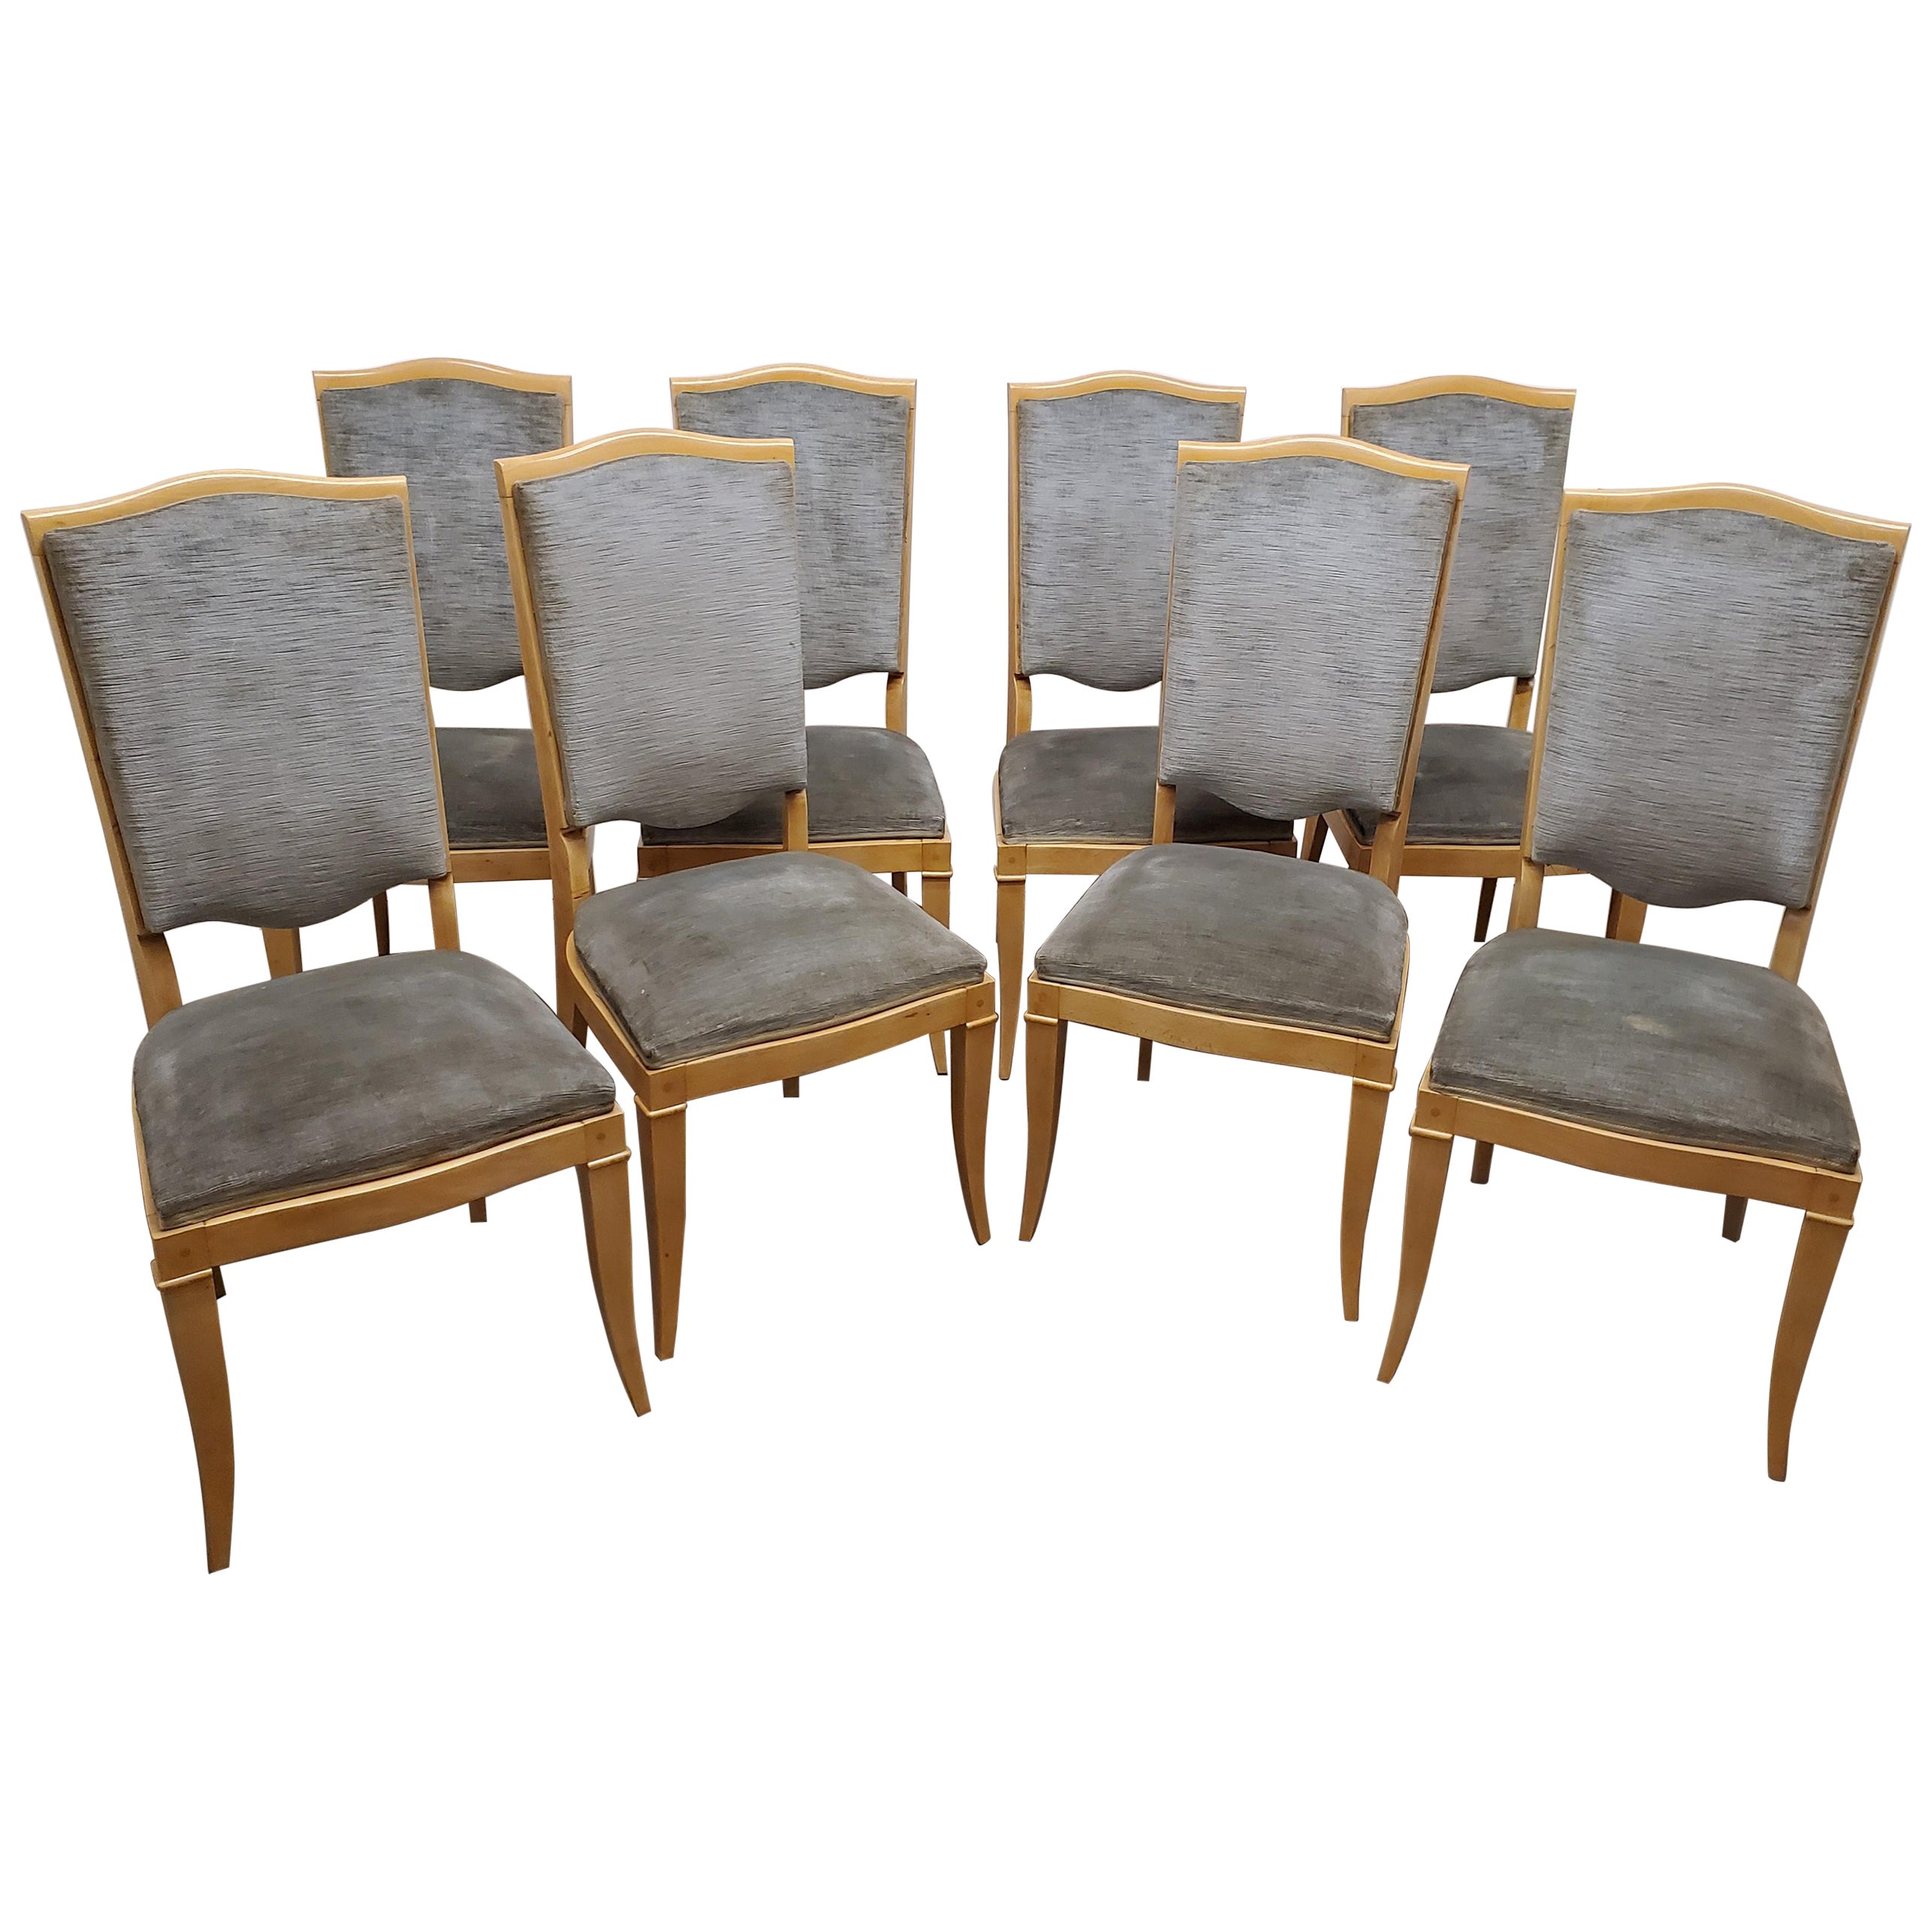 French 1940's Set of Eight Tall Back Dining Chairs in Beech, Attrib to Leleu